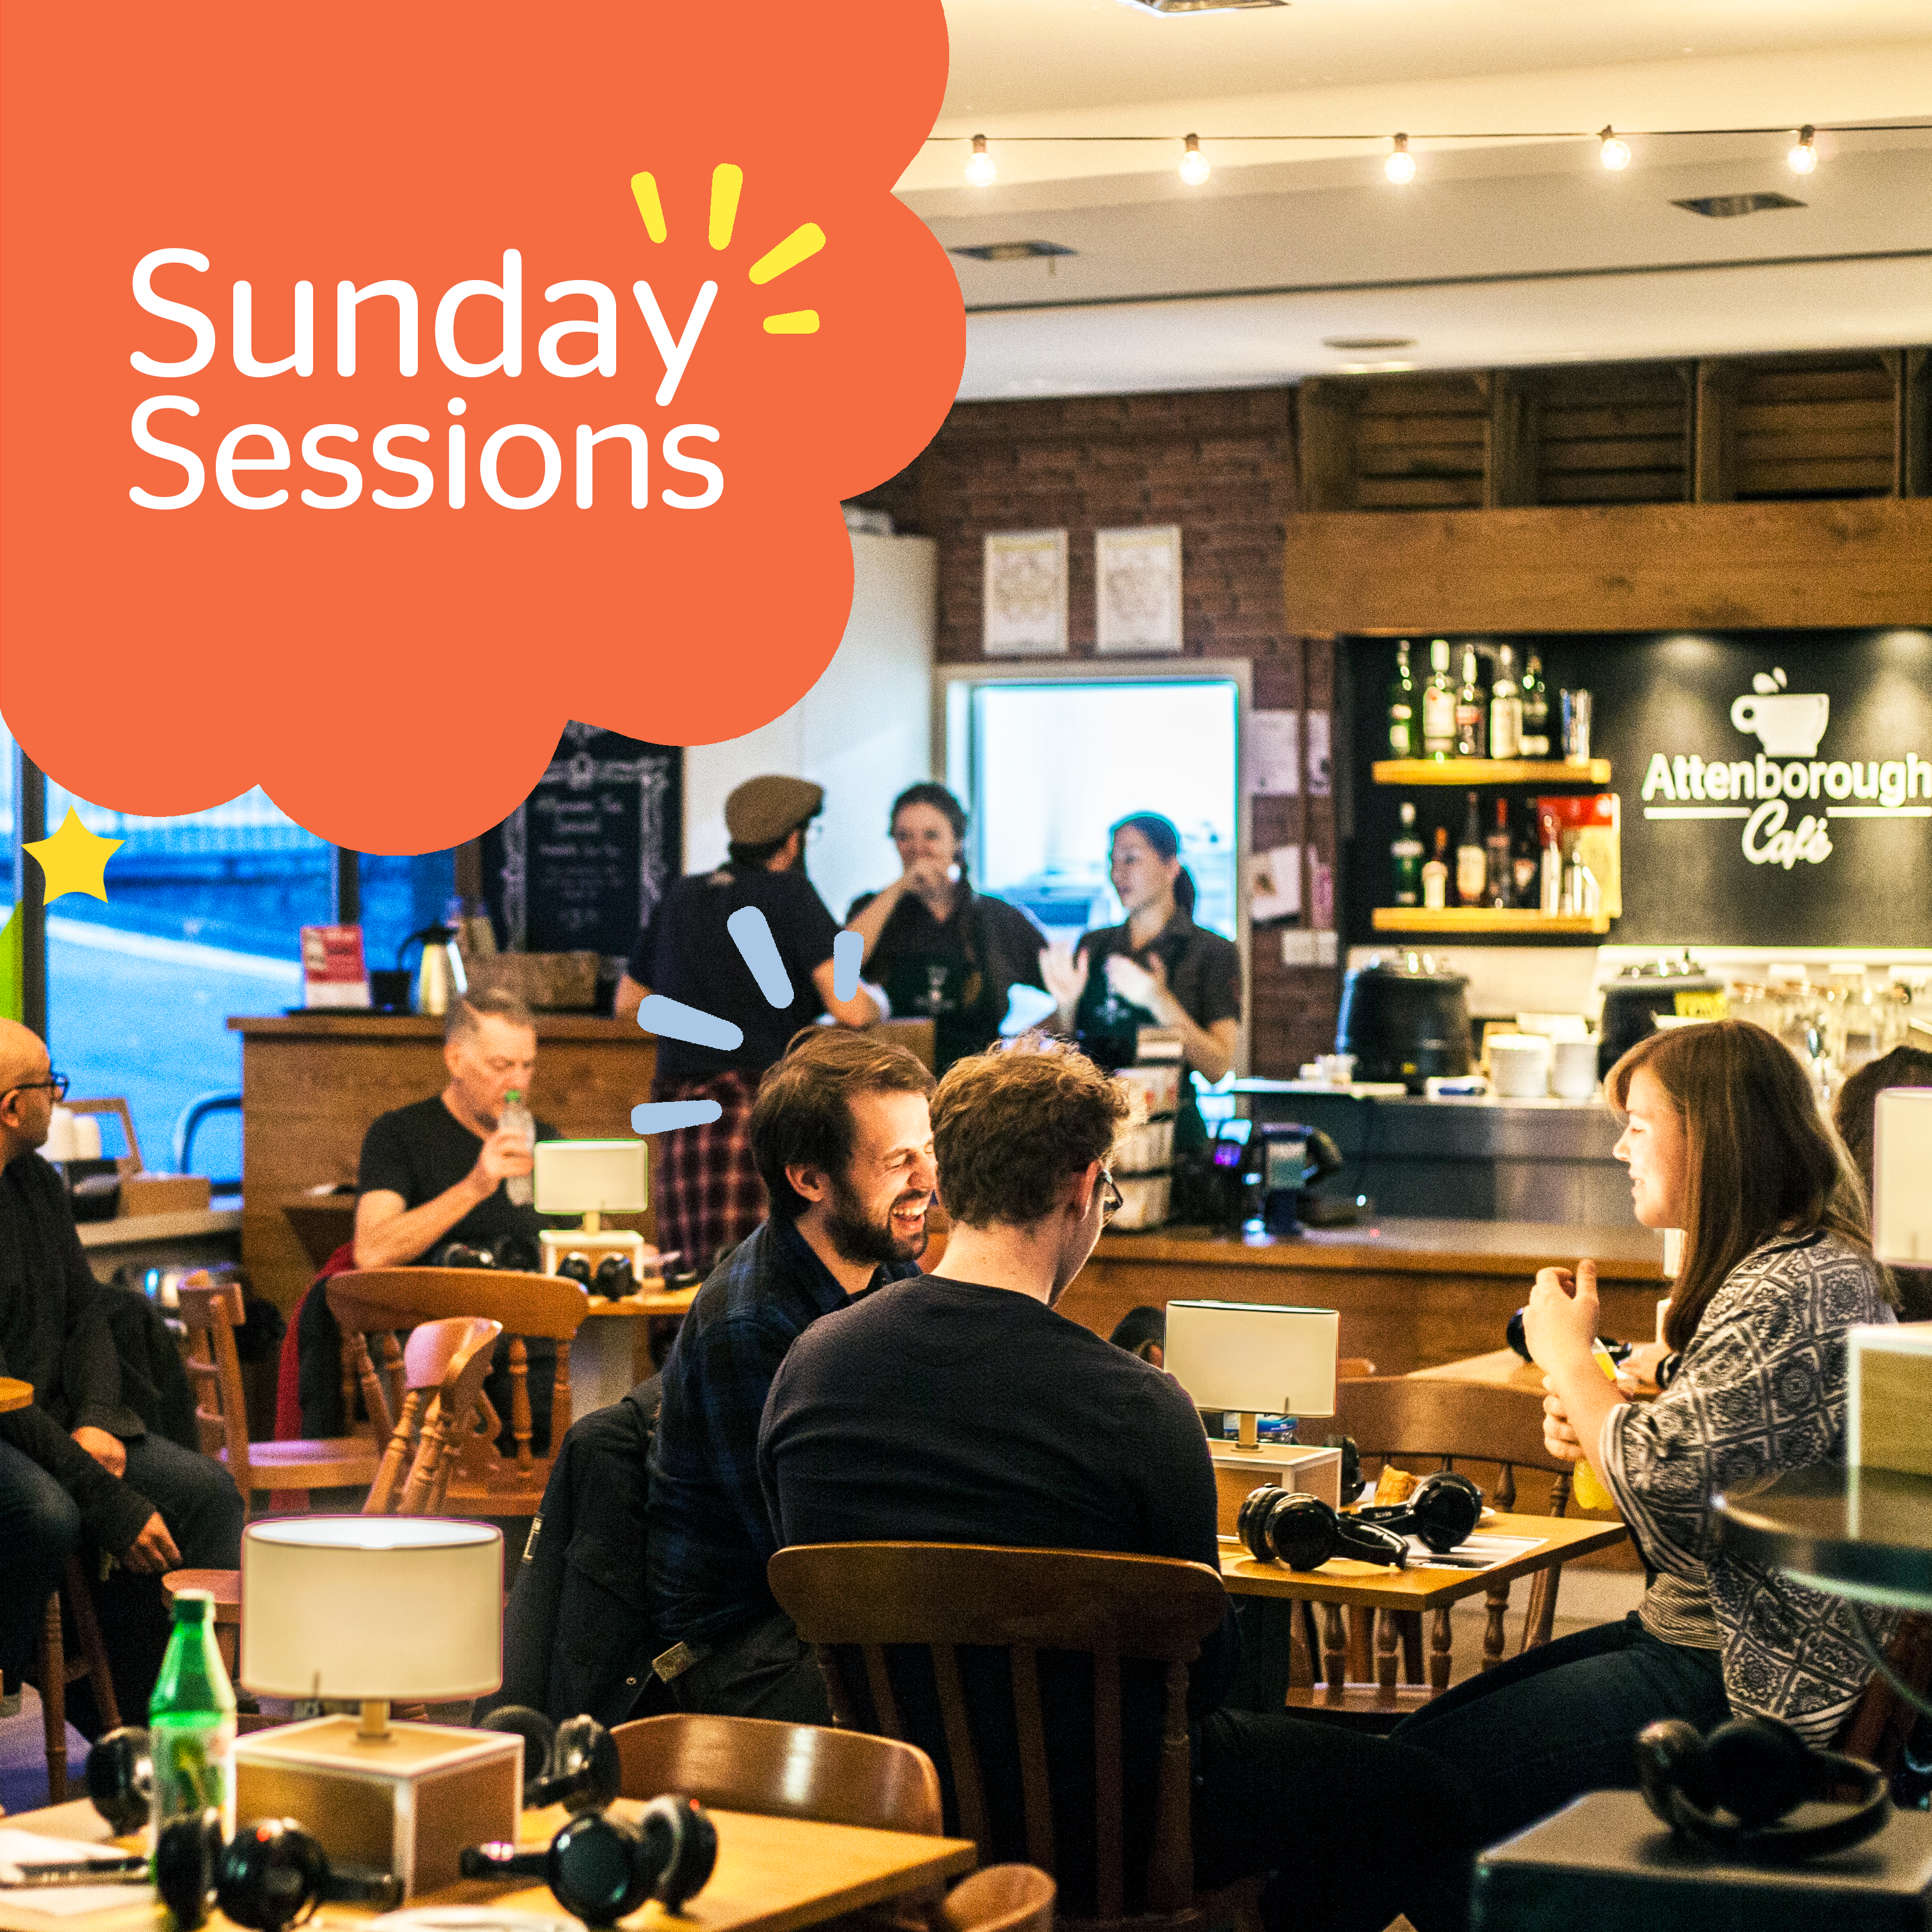 A group of people sitting in a cafe laughing and smiling with each other. In the corner is a red squiggle saying 'Sunday Sessions'.